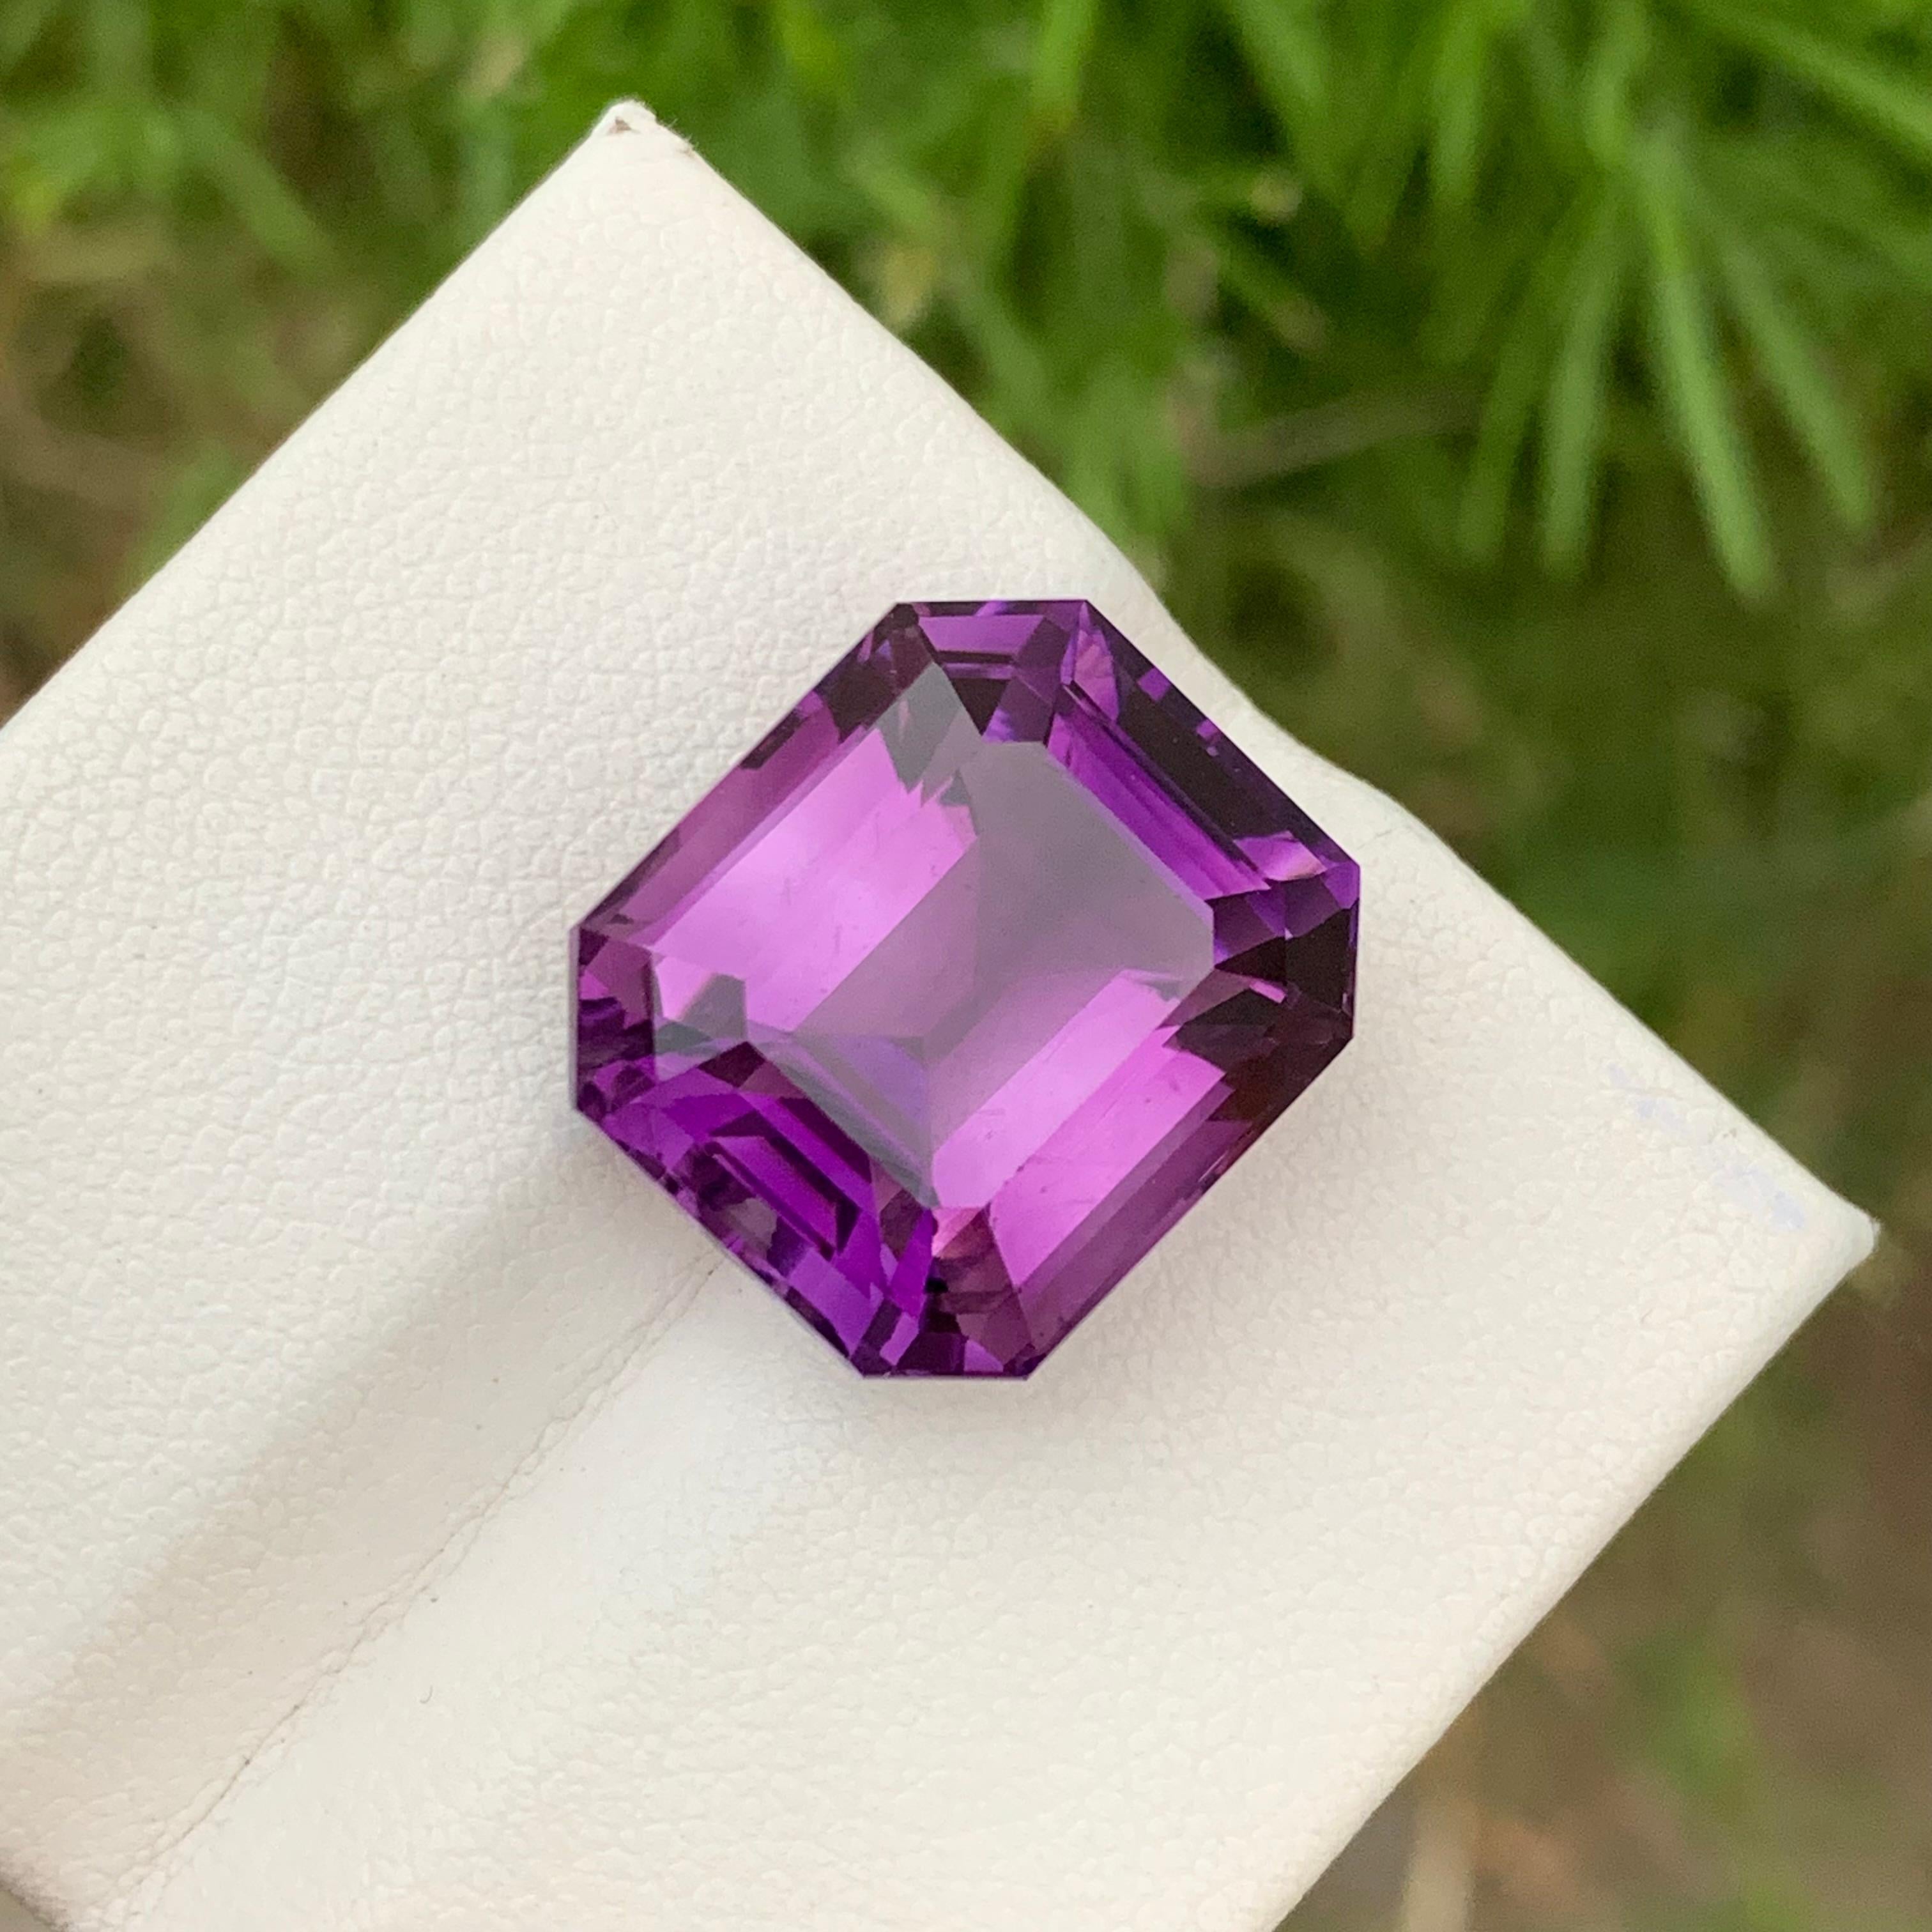 Emerald Cut 19.0 Carats Natural Loose Deep Purple Amethyst Gemstone From Brazil Mine For Sale